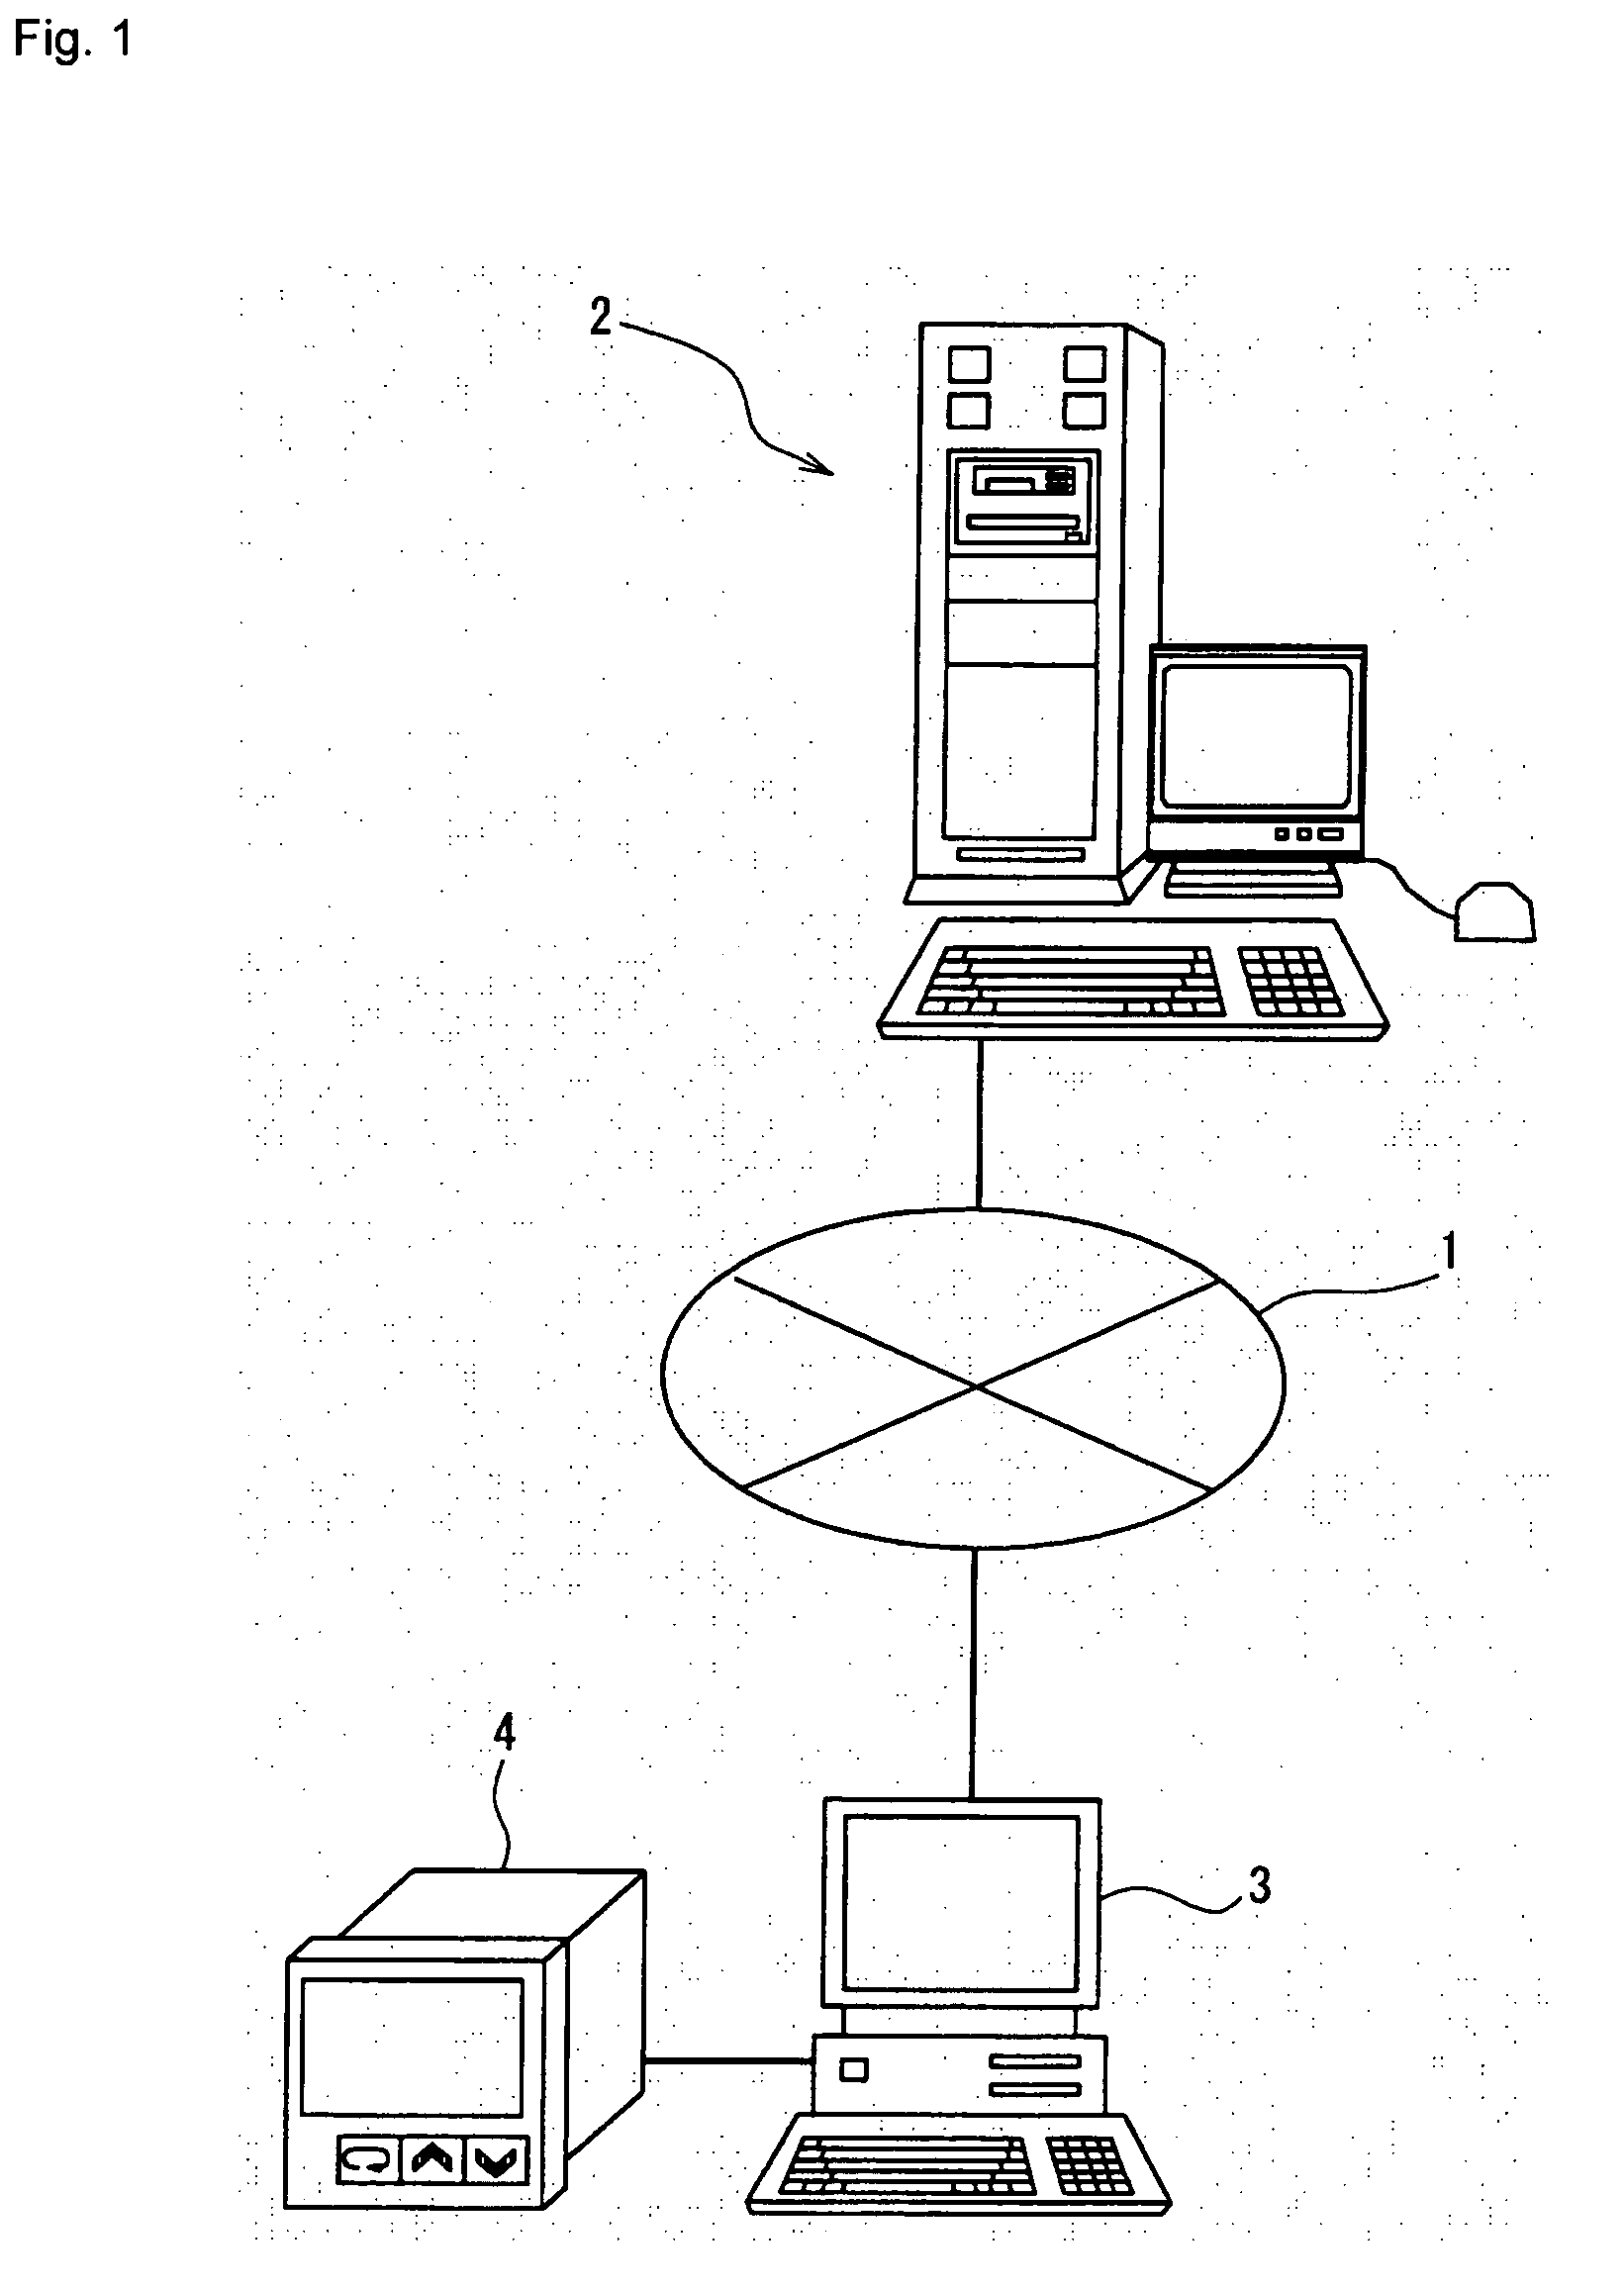 Instrumentation and control information providing method, instrumentation and control information providing system, instrumentation and control information providing server, and instrumentation and control equipment